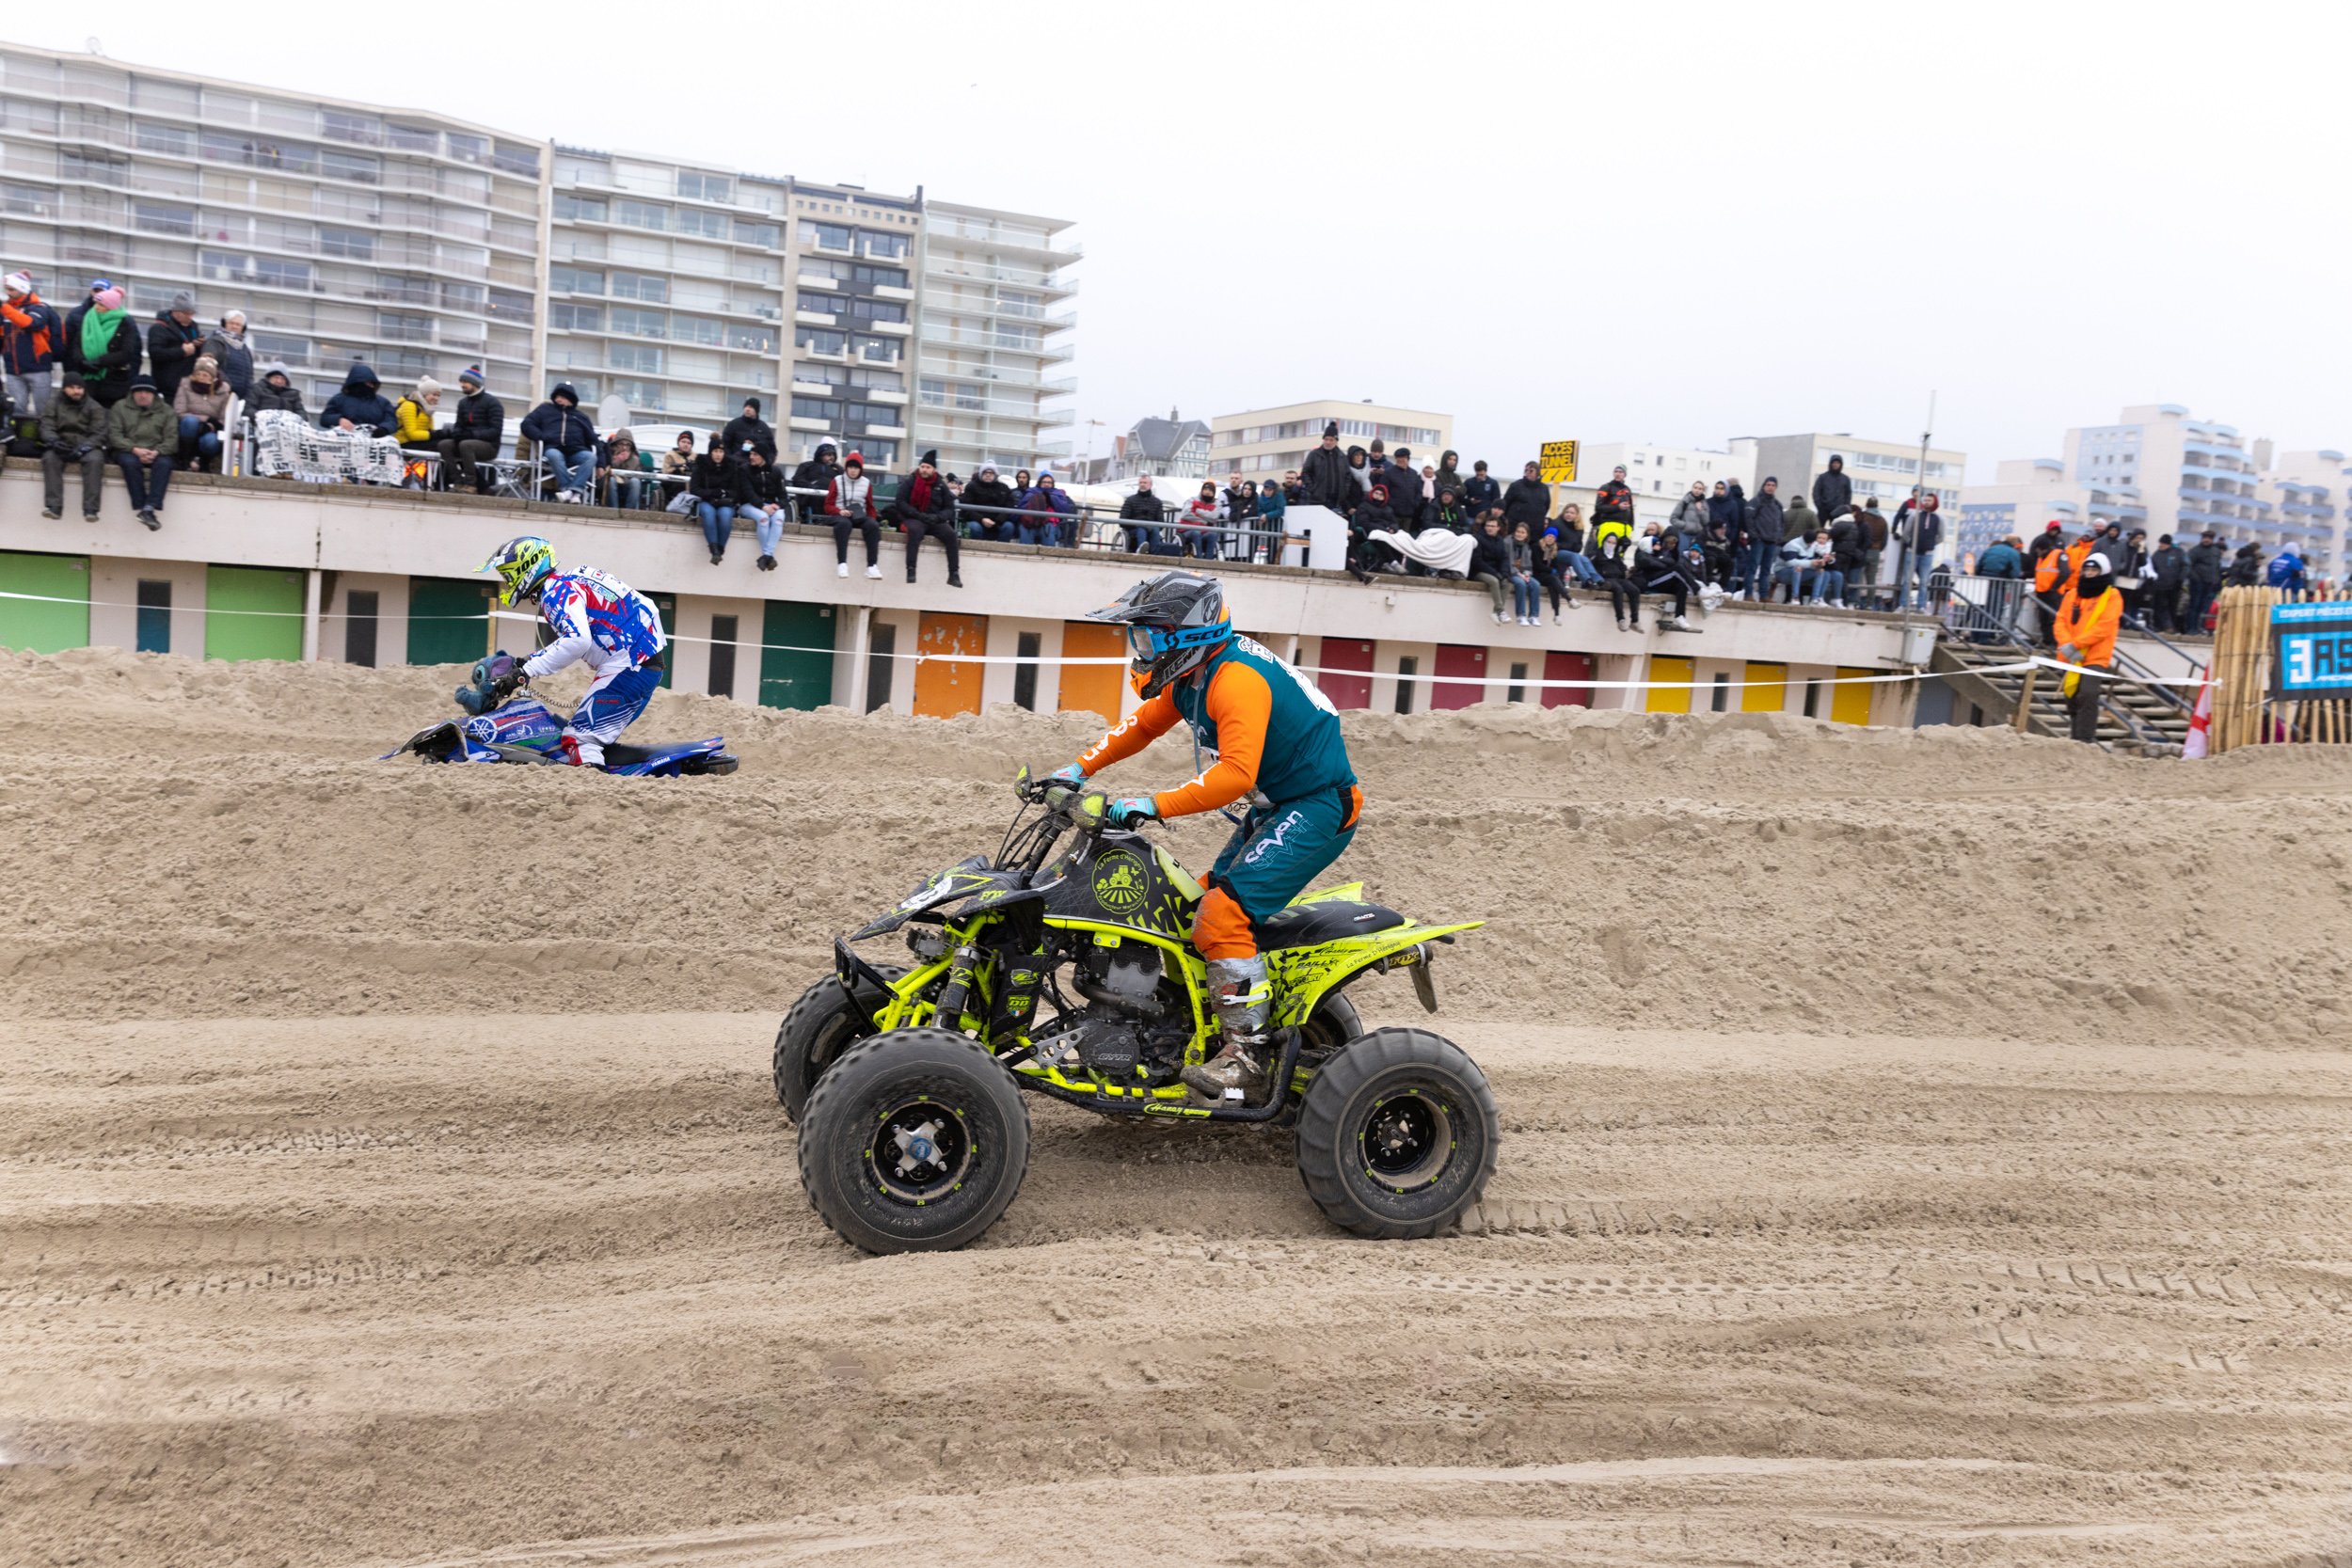 019_enduropale-official-reportage.jpg